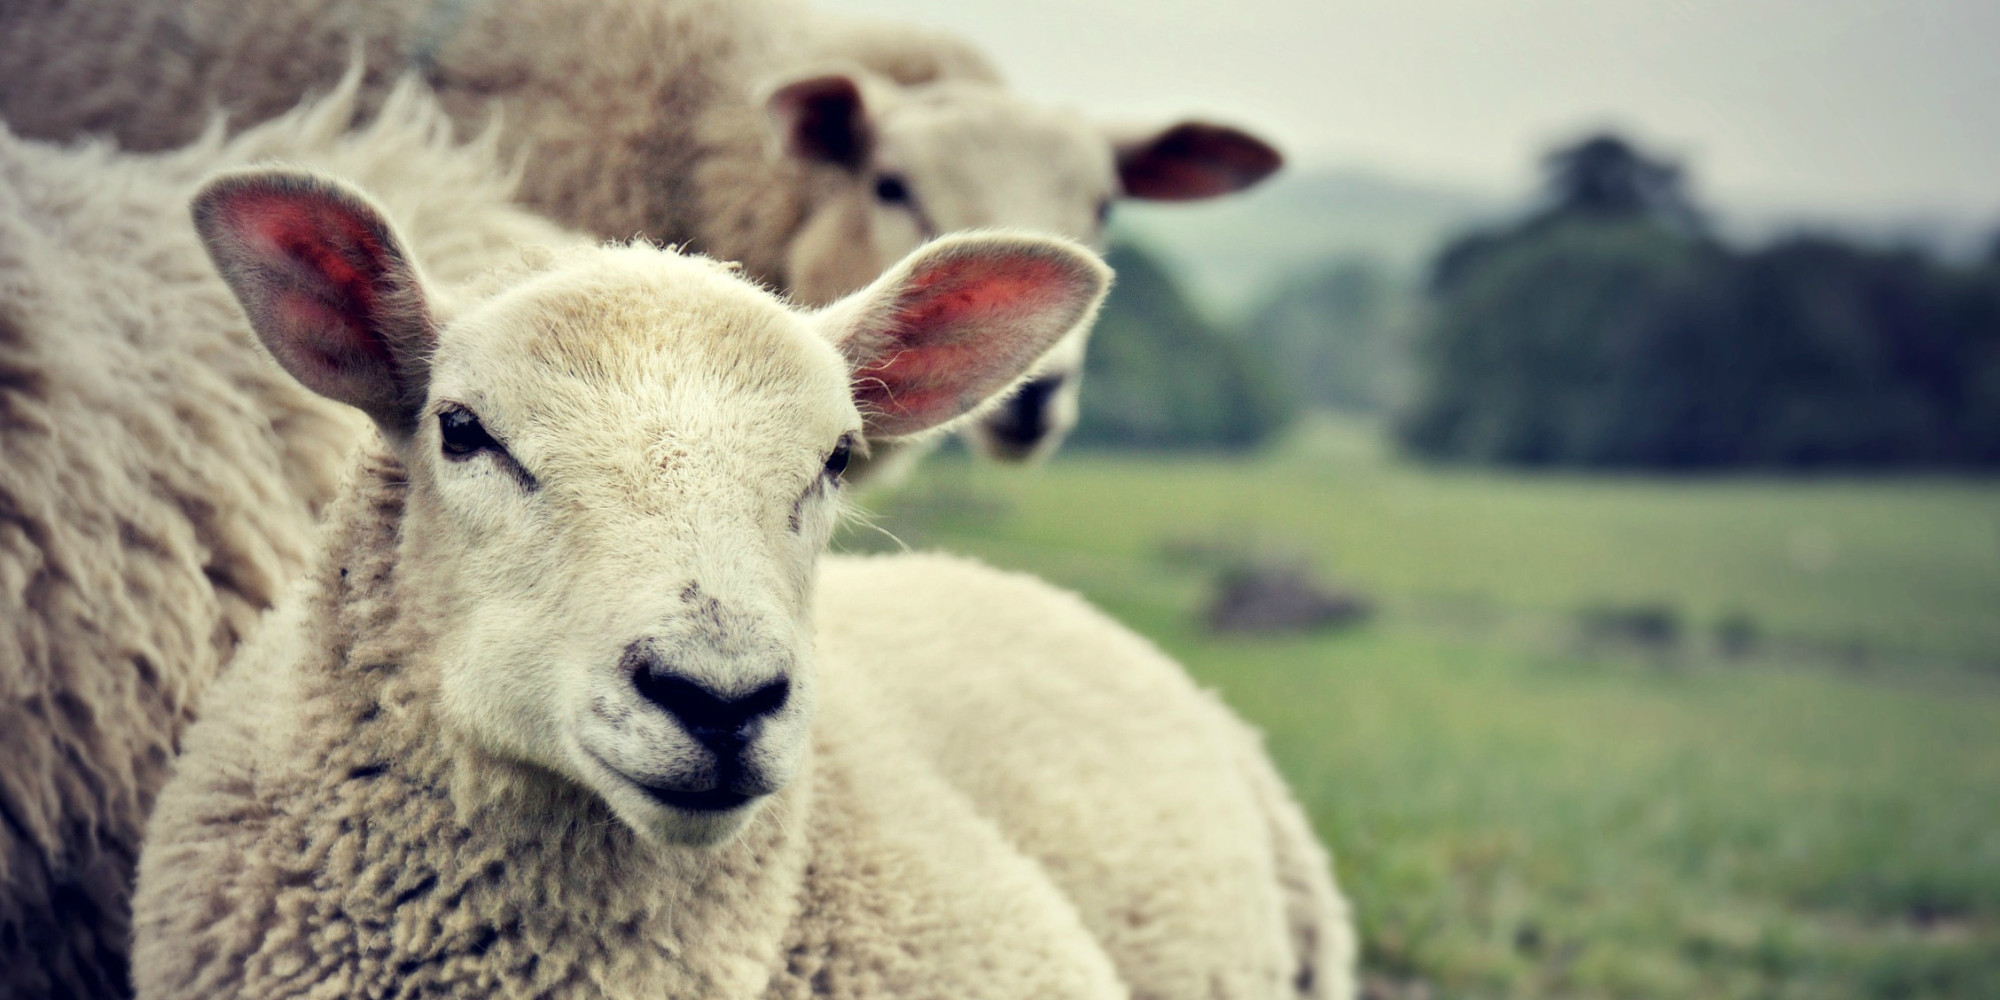 Ewe, Gross. Student Has Sex With Sheep In University Barn - Because He ...